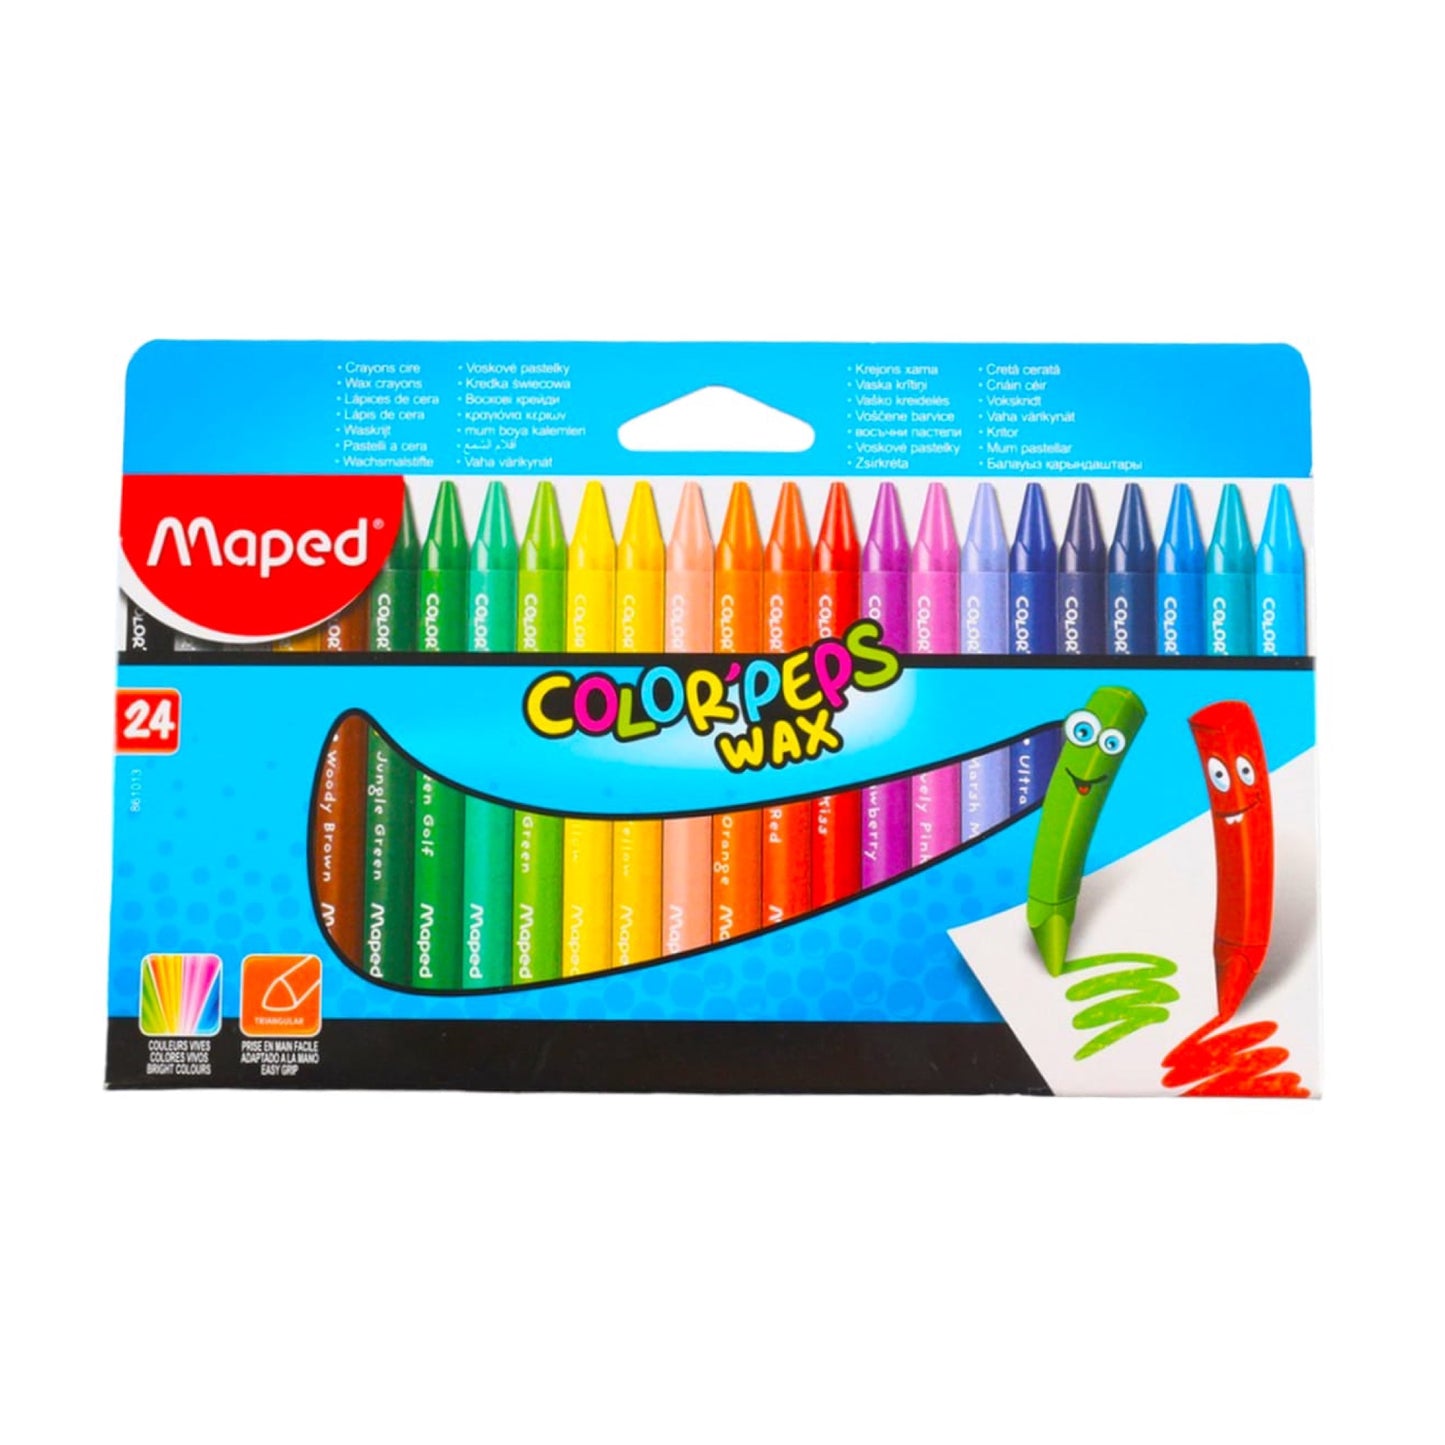 Maped Colorpeps Wax 24 Colors || الوان شمعية مابد ٢٤ لون